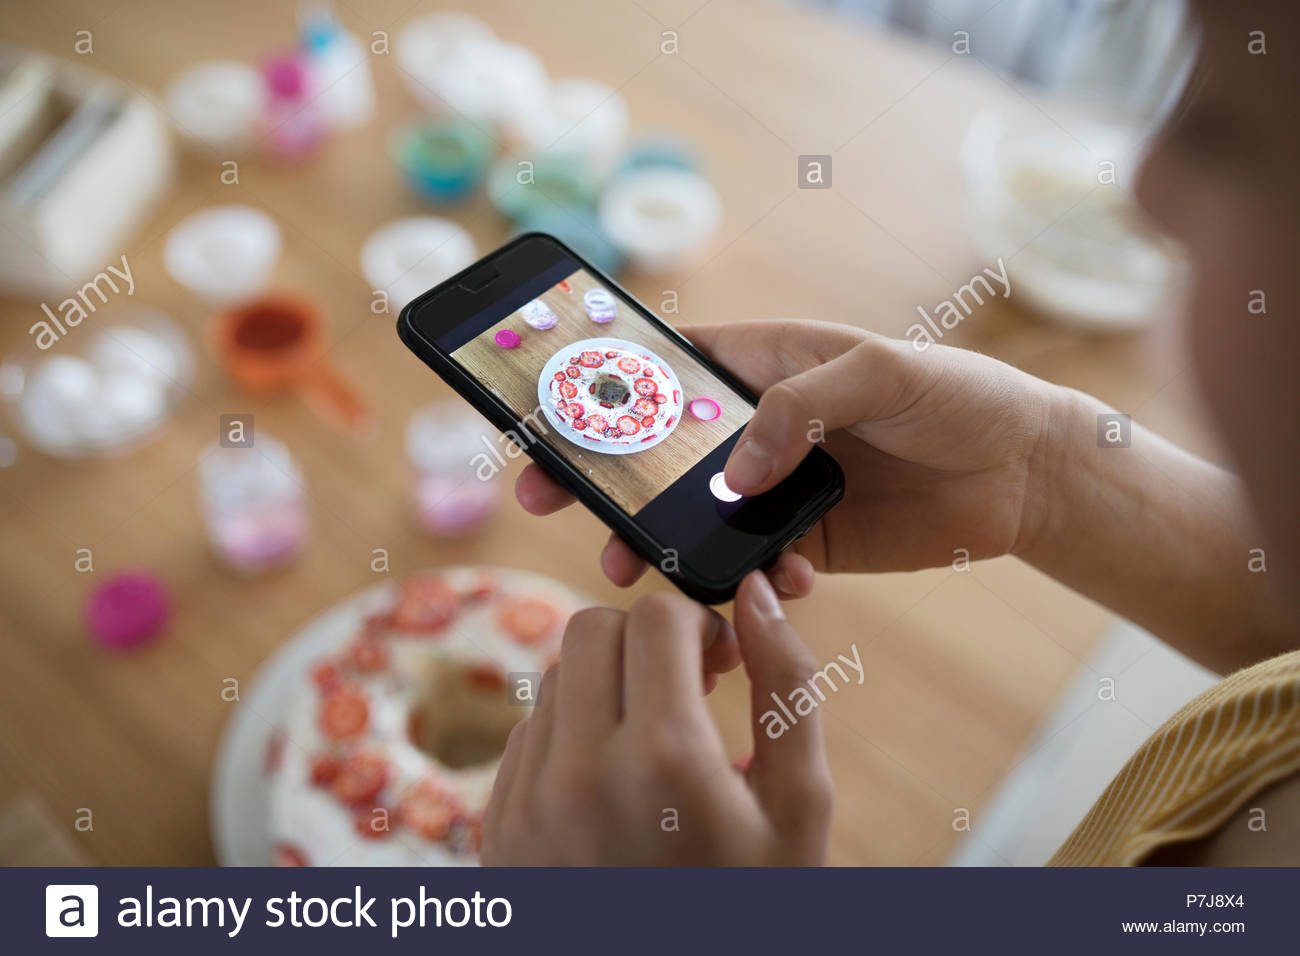 Girl with camera phone photographing cake Stock Photo